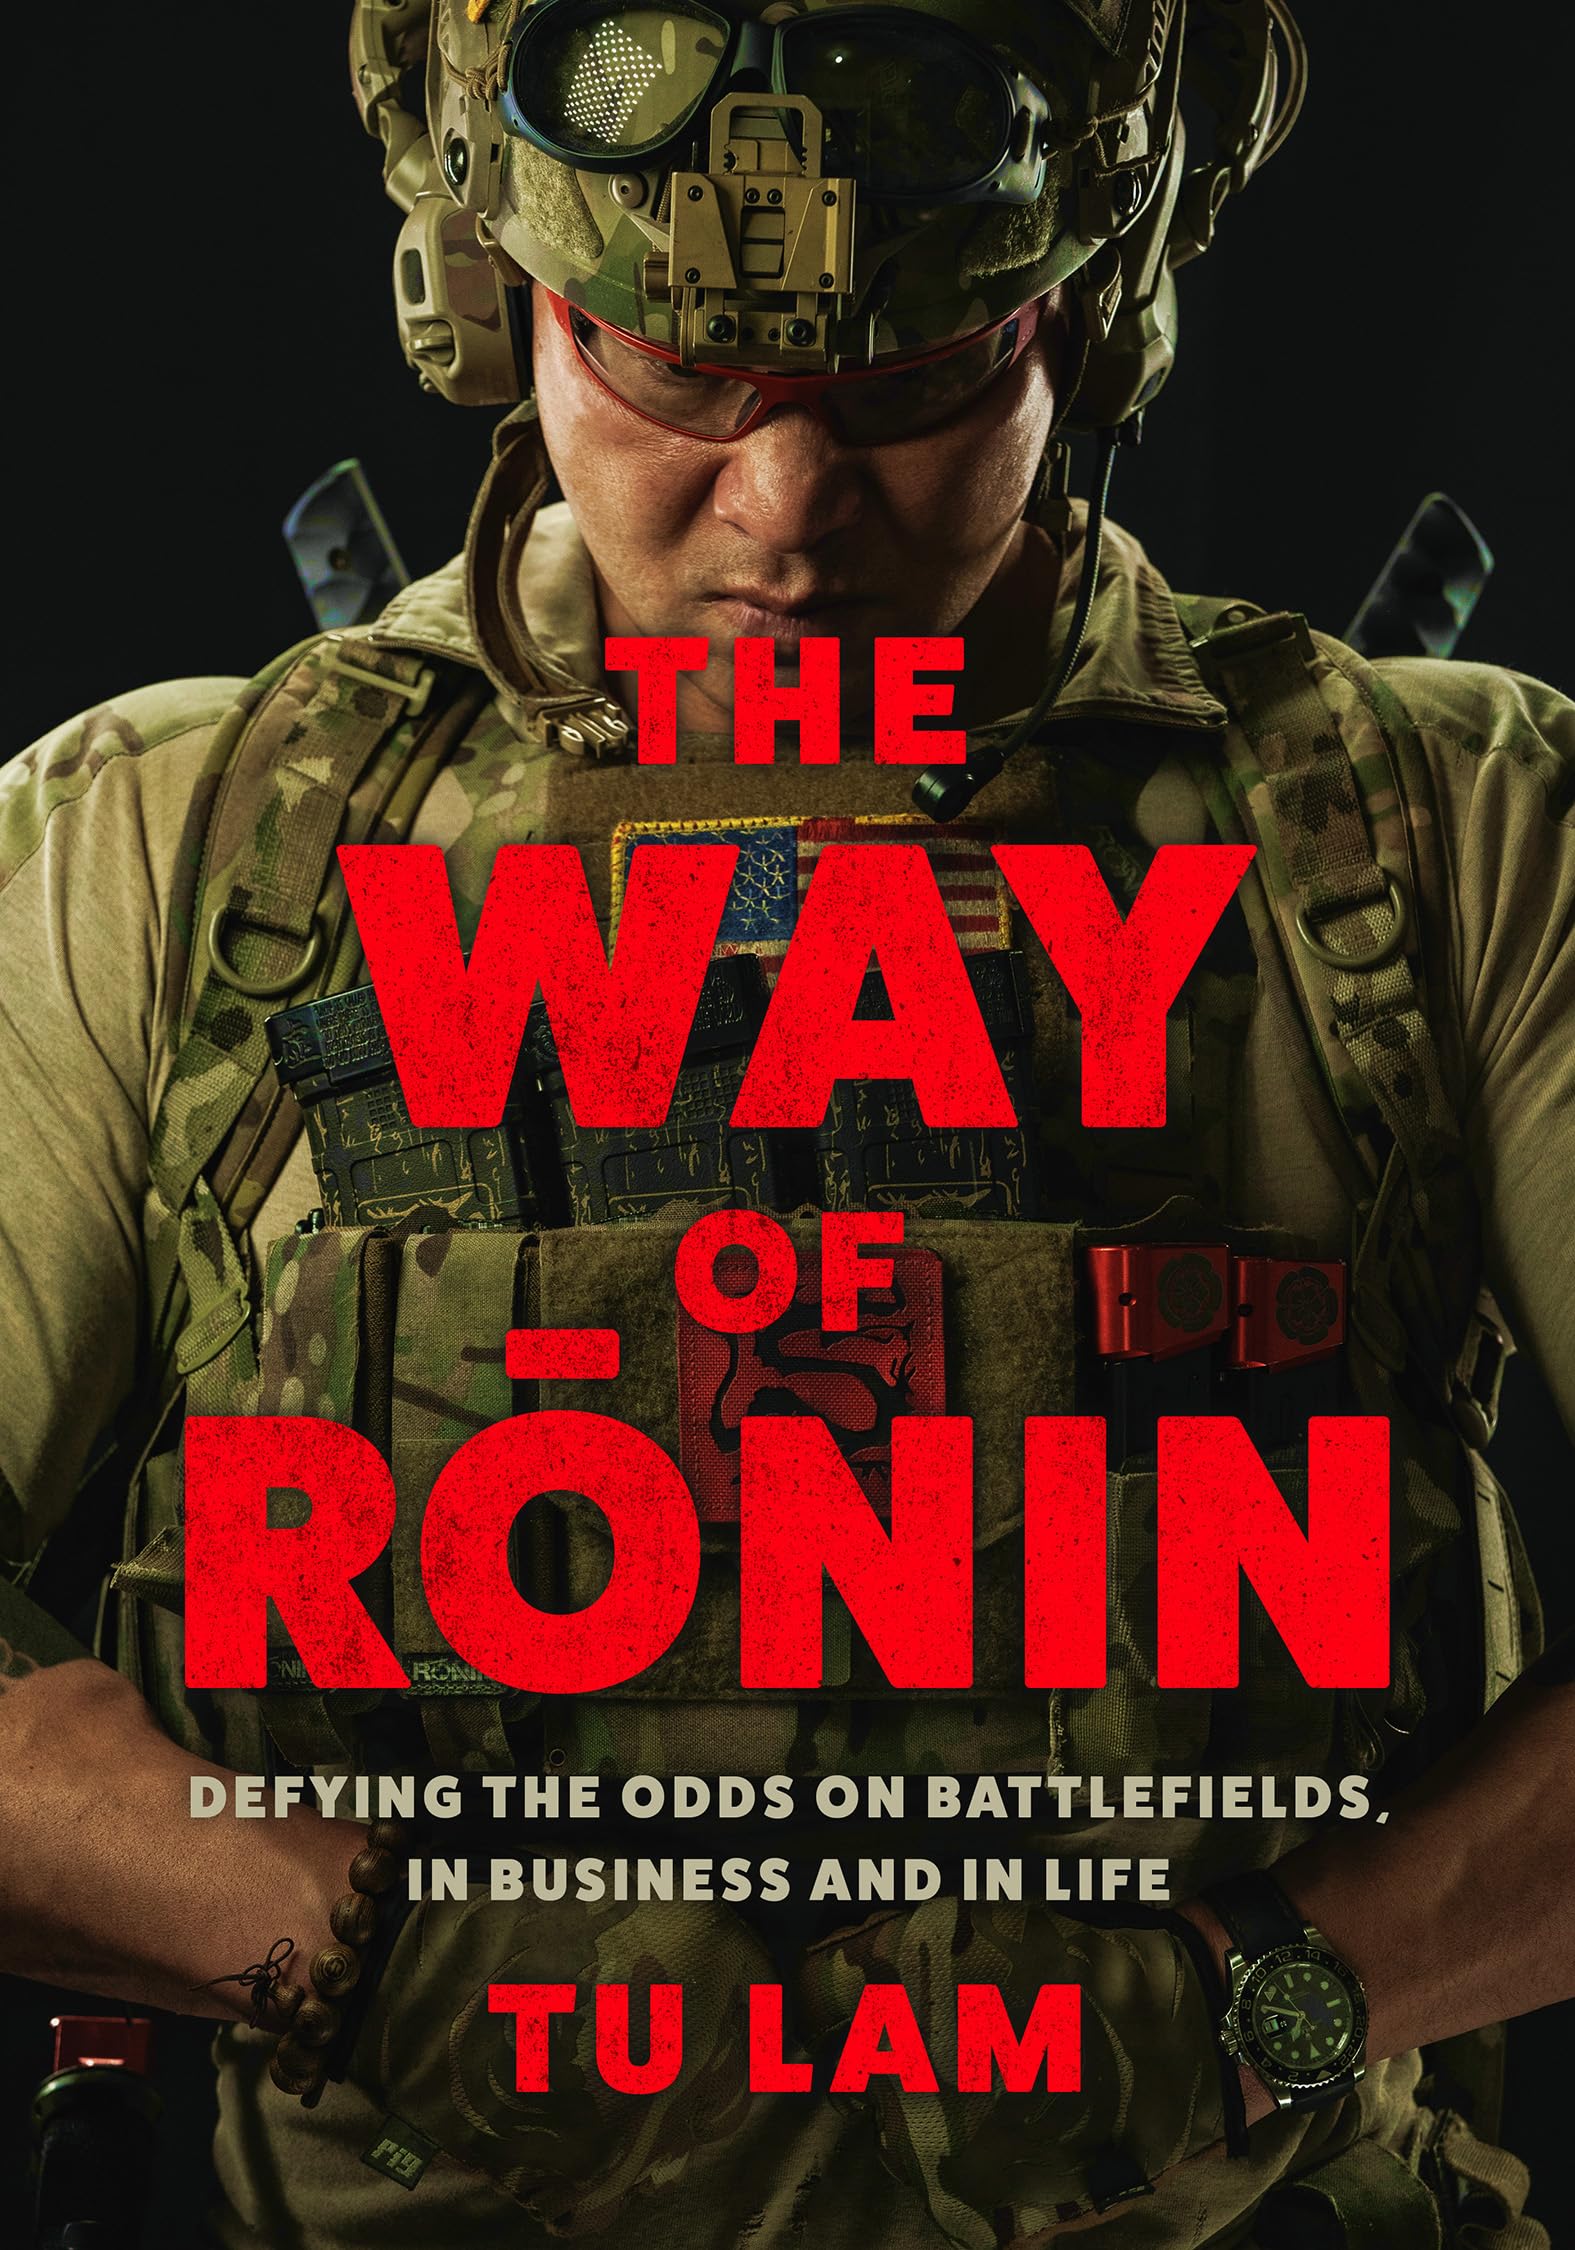 The Way of Ronin: Defying the Odds on Battlefields, in Business and in Life by Lam, Tu